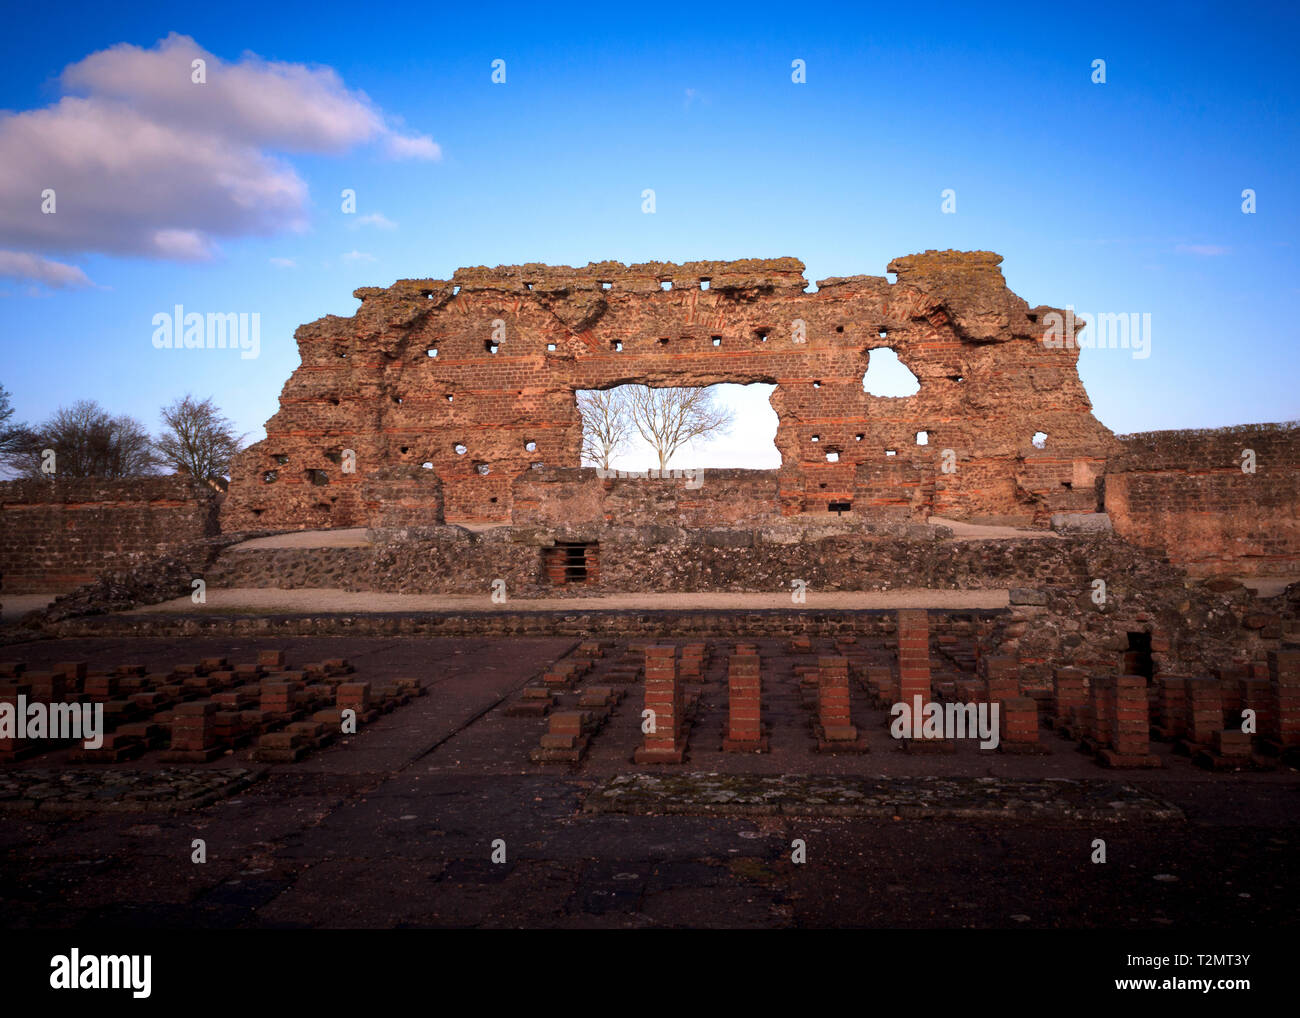 The remnants of the Wroxeter Roman city in Wroxeter, Shropshire, England, UK. Stock Photo